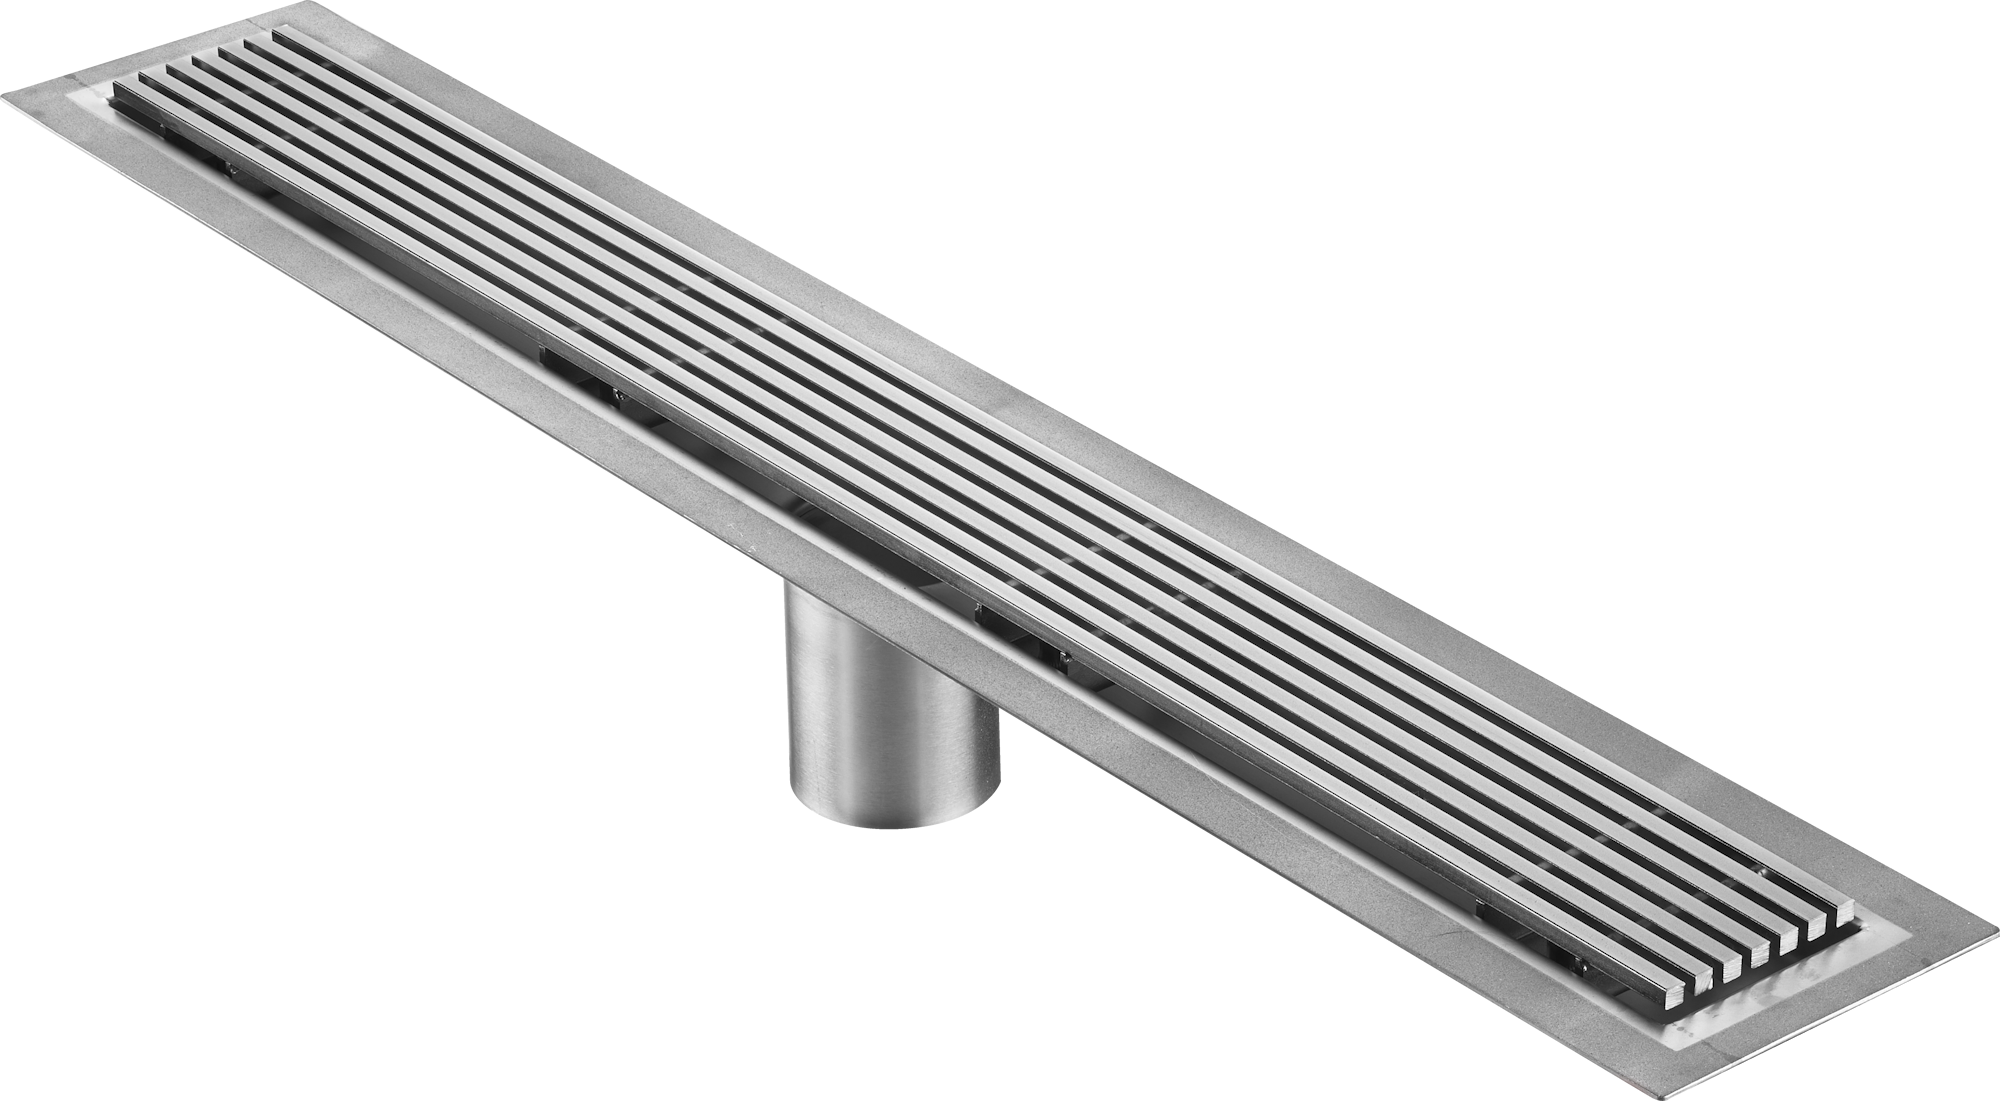 53 Inch Wedge Wire Grate Linear Drain Brushed Stainless Steel, Drains Unlimited